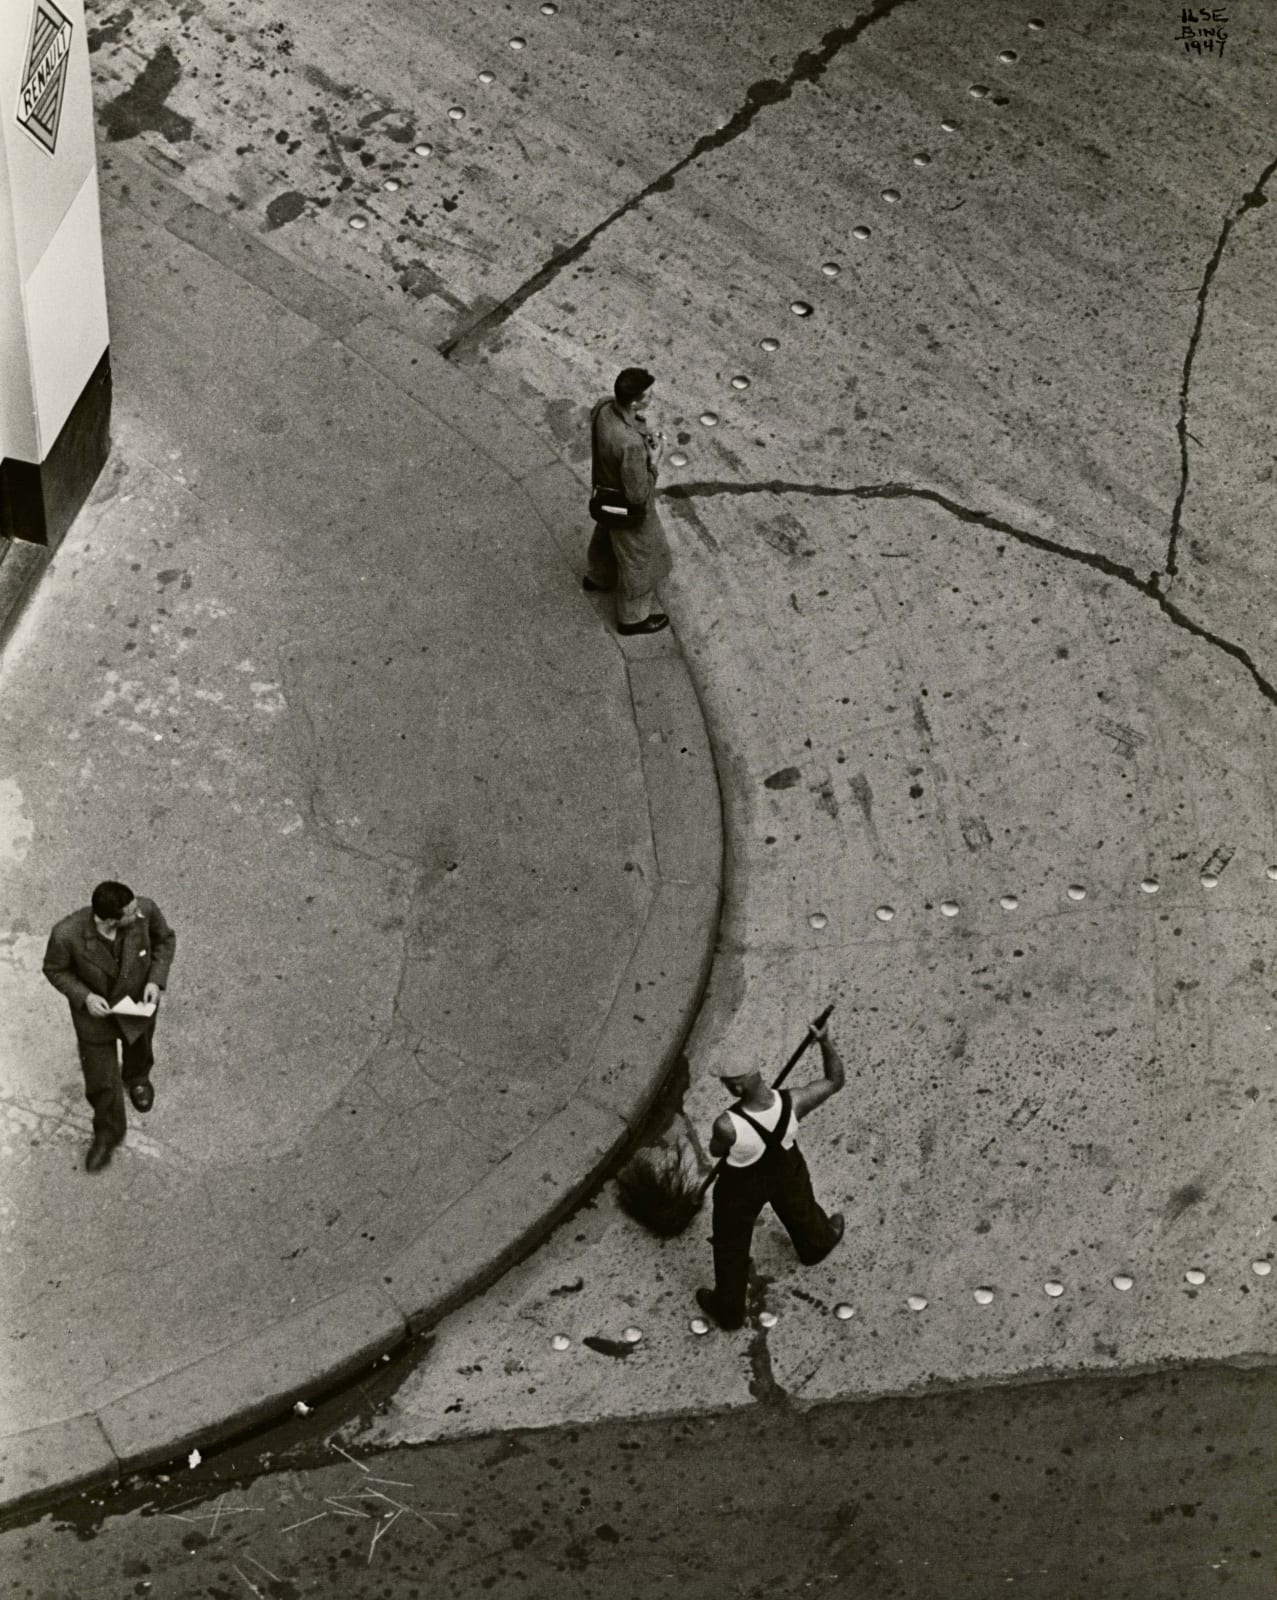 Ilse Bing photograph of street cleaner in Paris from apartment building